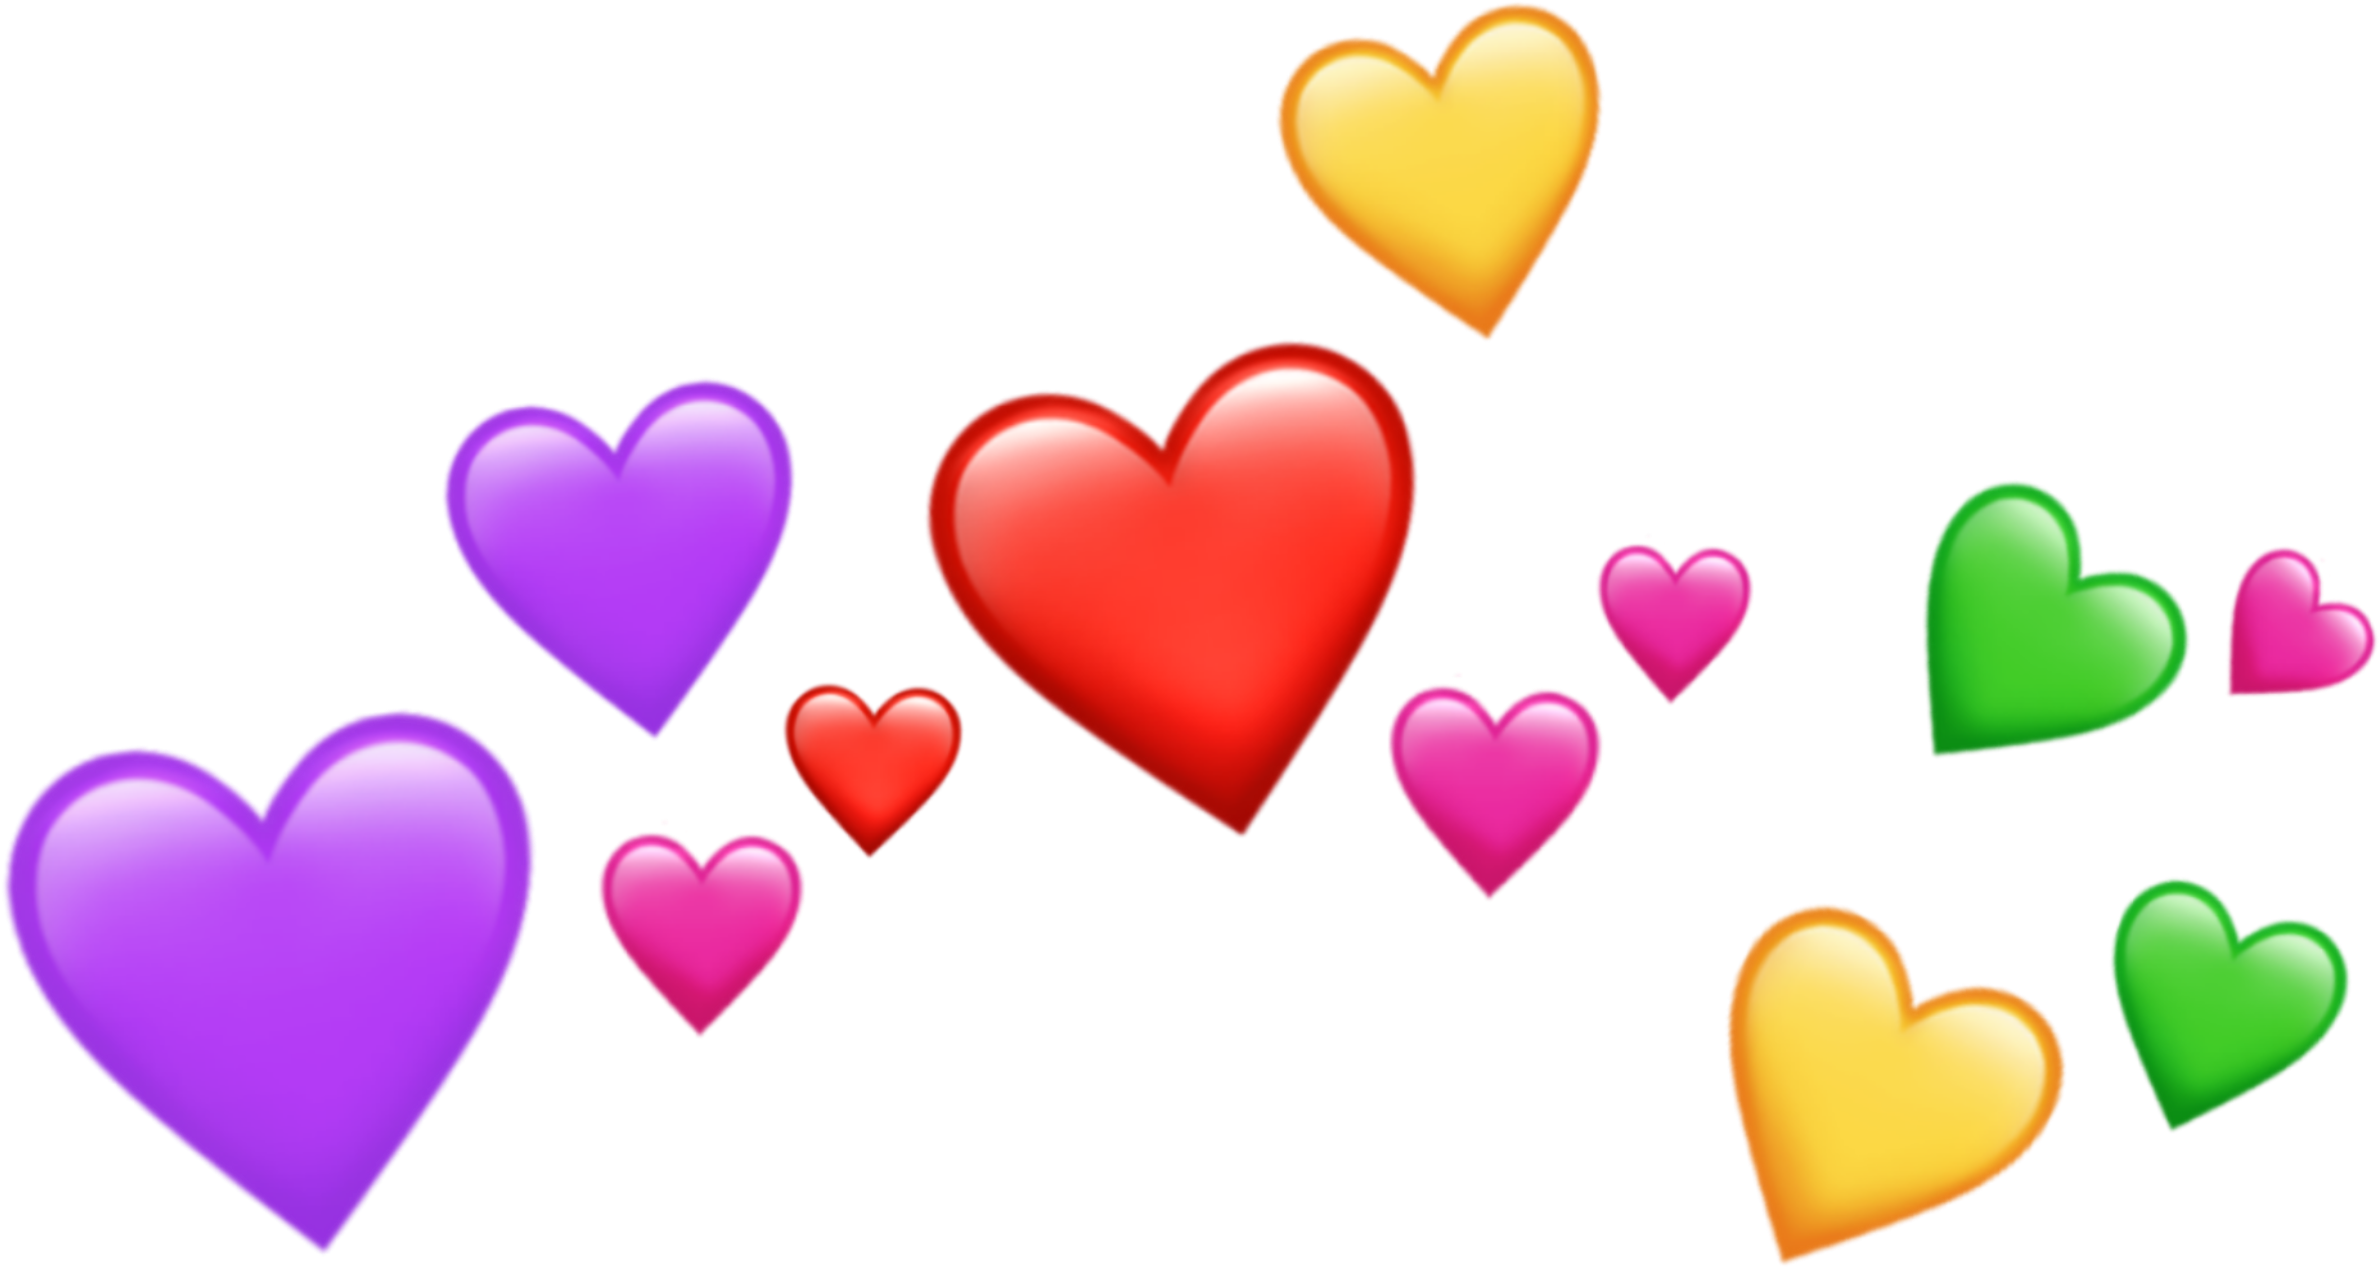 Heart Emoji Background Clipart Objects Transparent Clip Art | Images ...